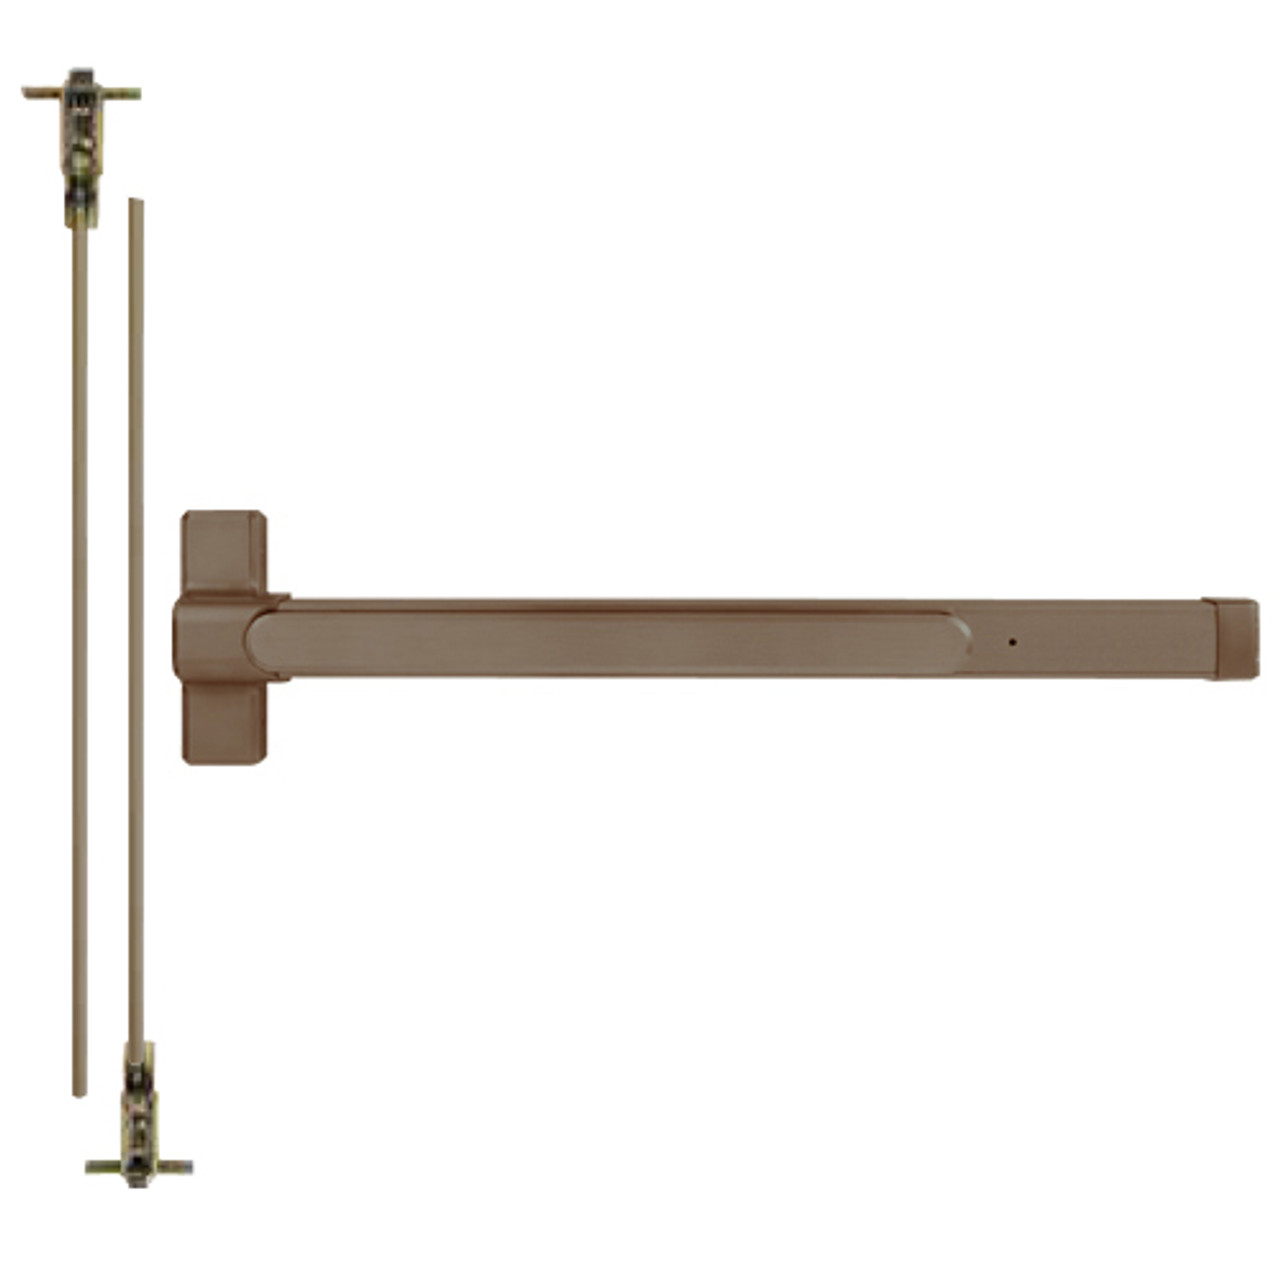 QED124EDX-36-8-313AN Stanley QED100 Series Heavy Duty Concealed Vertical Rod Hex Dog Exit Device in Anodized Duranodic Bronze Finish